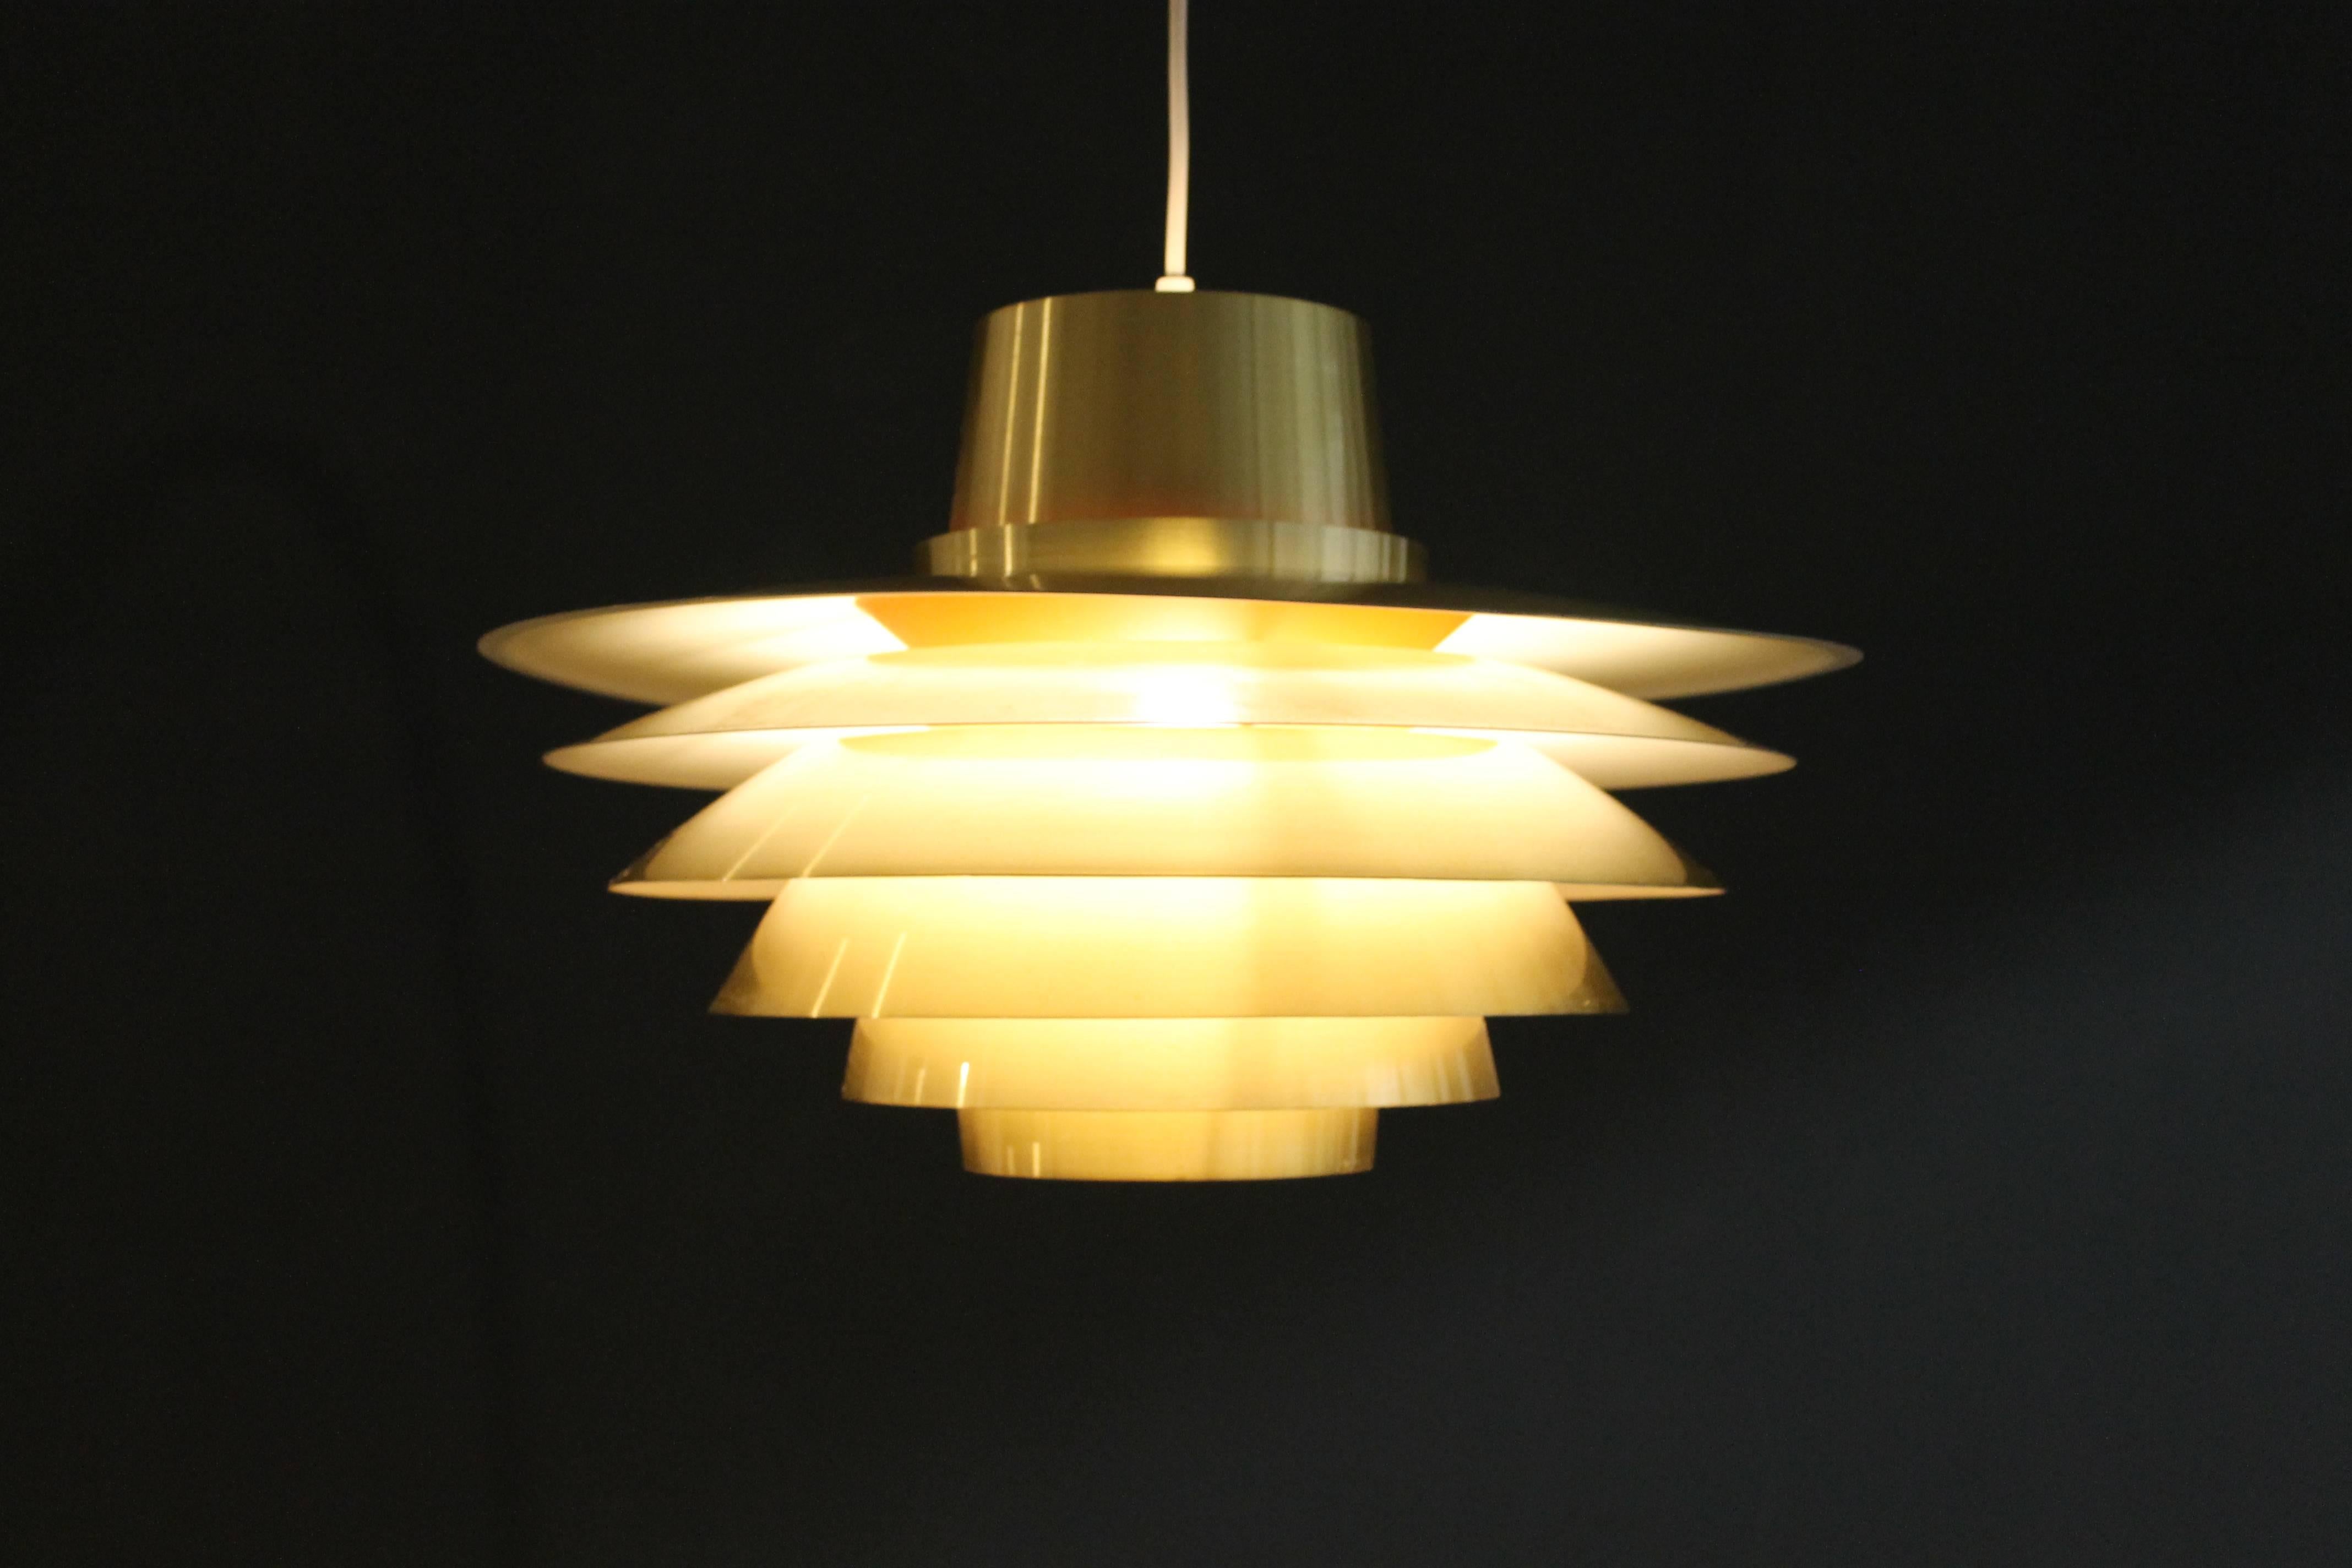 Extra large (21 inches) Verona pendent light by Svend Middelboe for Nordisk Solar, 1970s.

Danish lighting manufacturer Nordisk Solar was founded in 1919 by Jacob L. Jørgensen and Herluf Sørensen and is well-known today on the vintage markets for